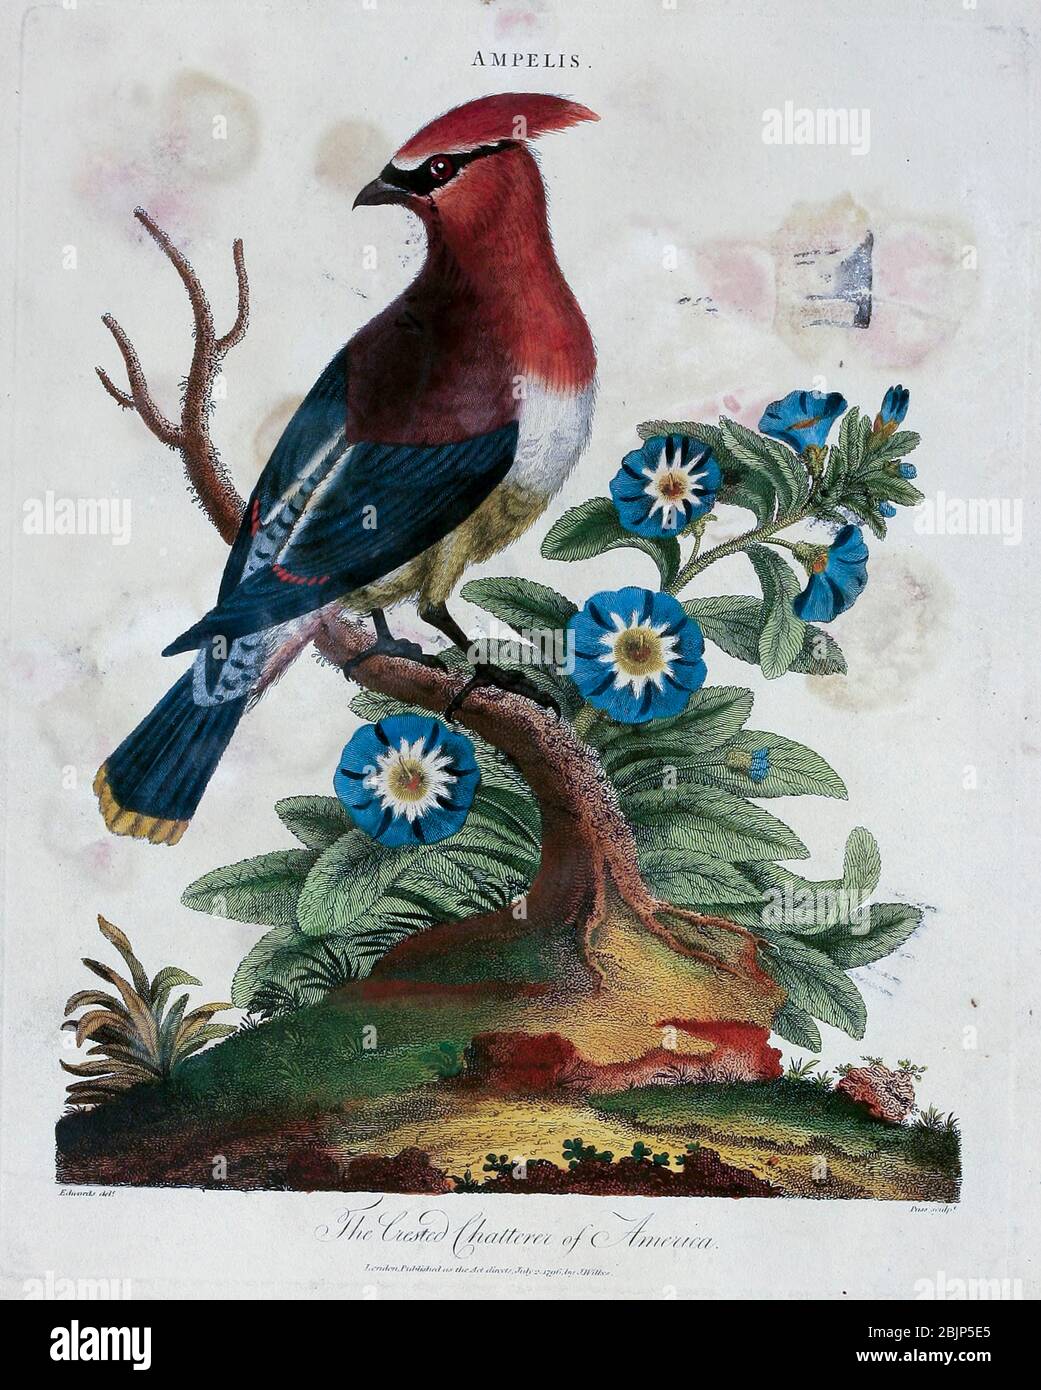 Ampelis The Crested Chatterer of America Copper engraving with hand colouring from Encyclopaedia Londinensis, or, Universal dictionary of arts, sciences, and literature [miscellaneous plates] by Wilkes, John Publication date 1796-1829 Stock Photo